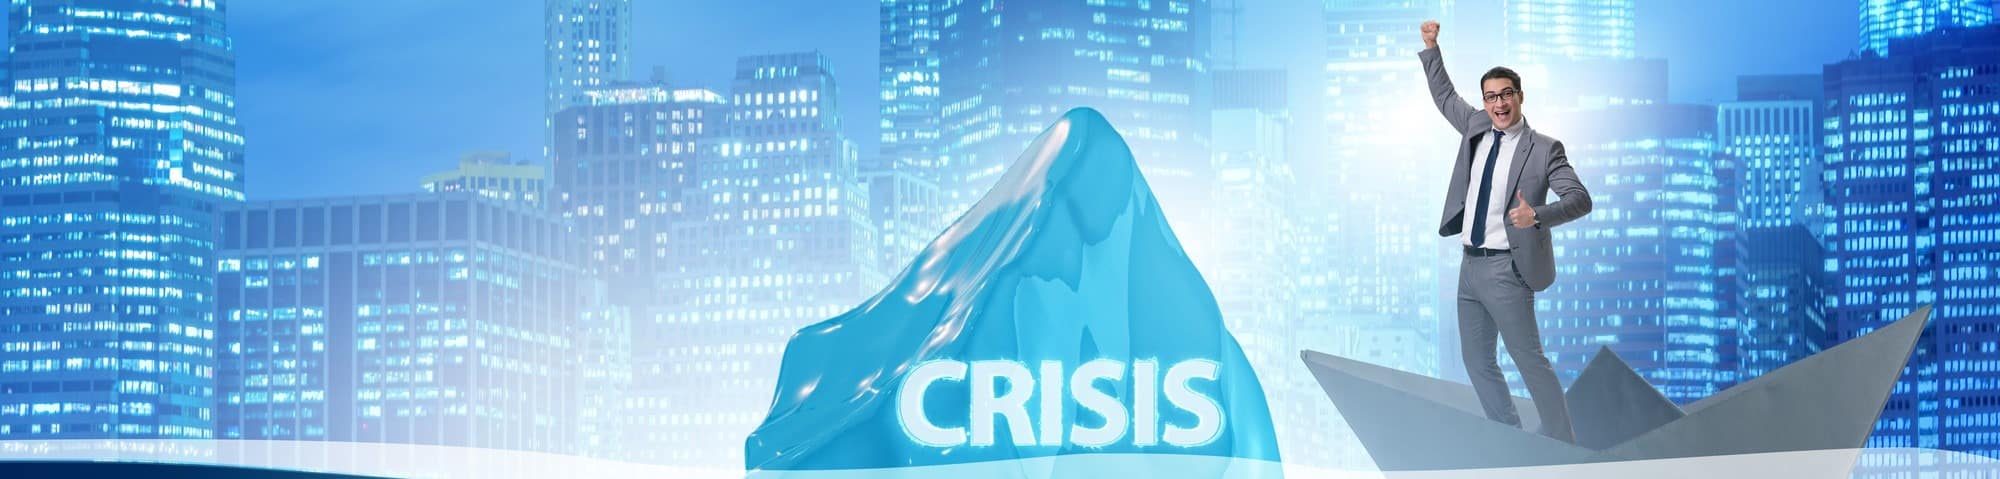 3 Key Focuses For Business Leaders During A Crisis